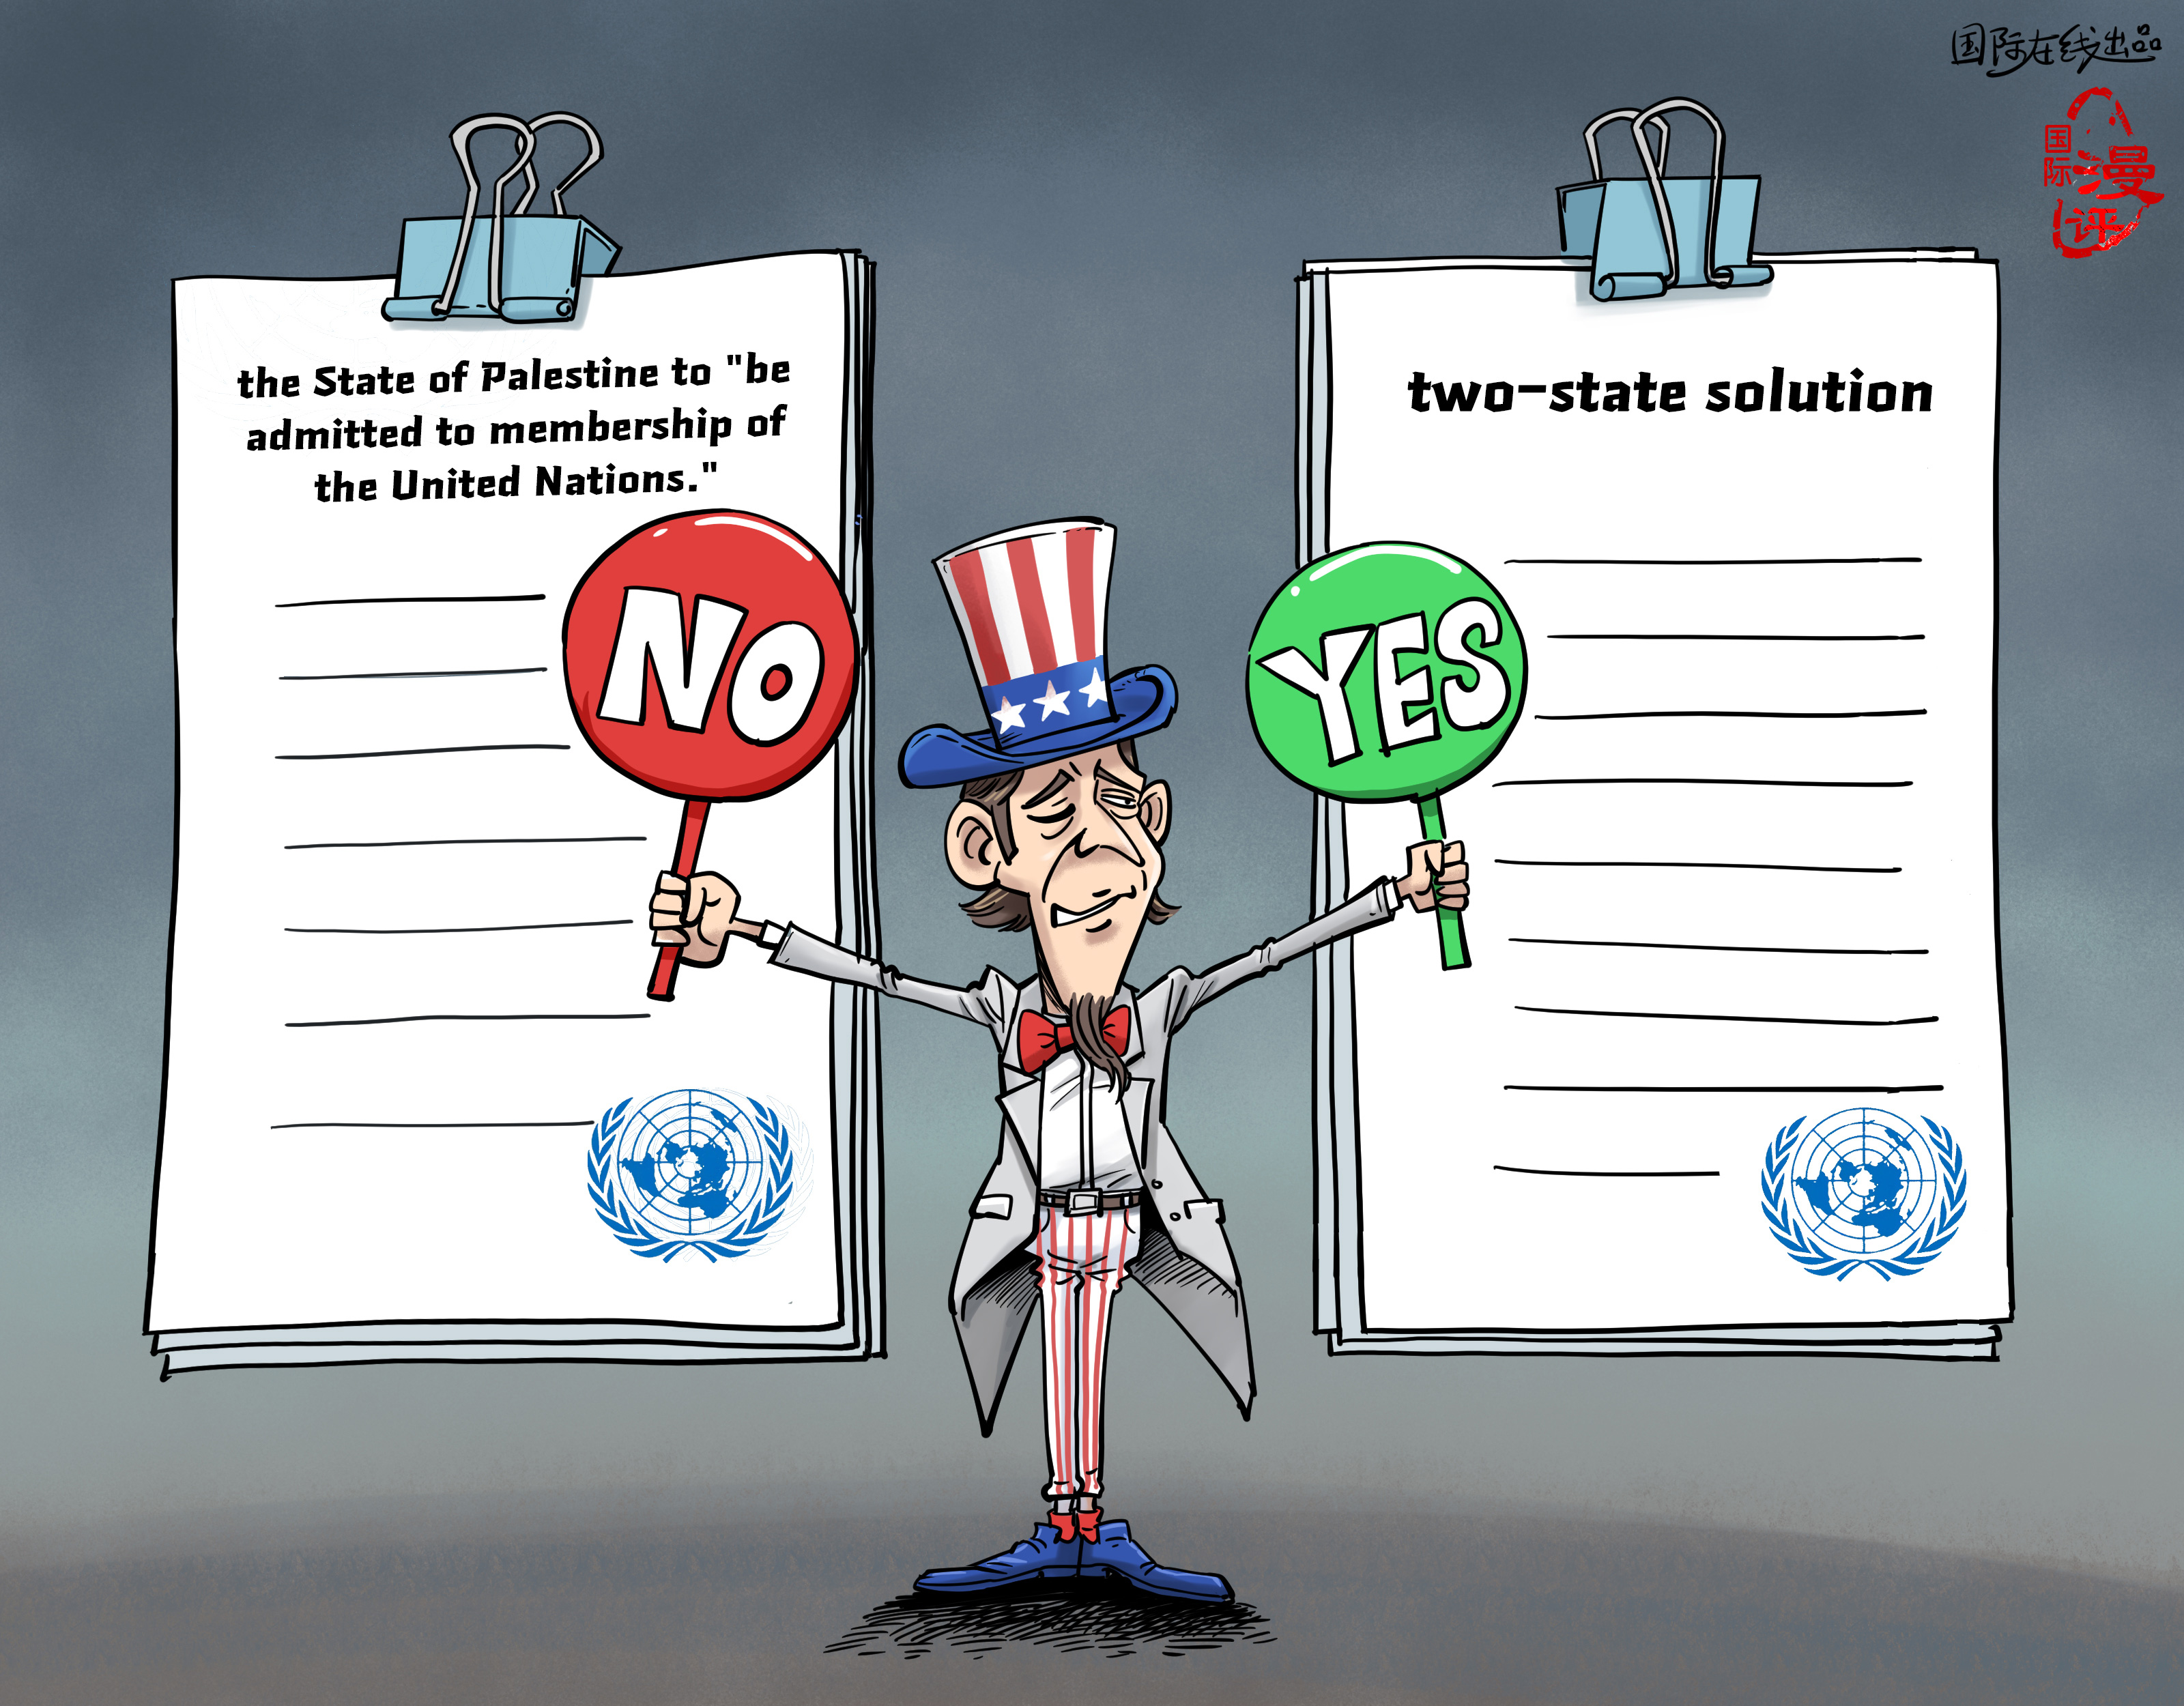 【Editorial Cartoon】You guess which one is the truth?_fororder_S英【国际漫评】你猜哪个是真心话？